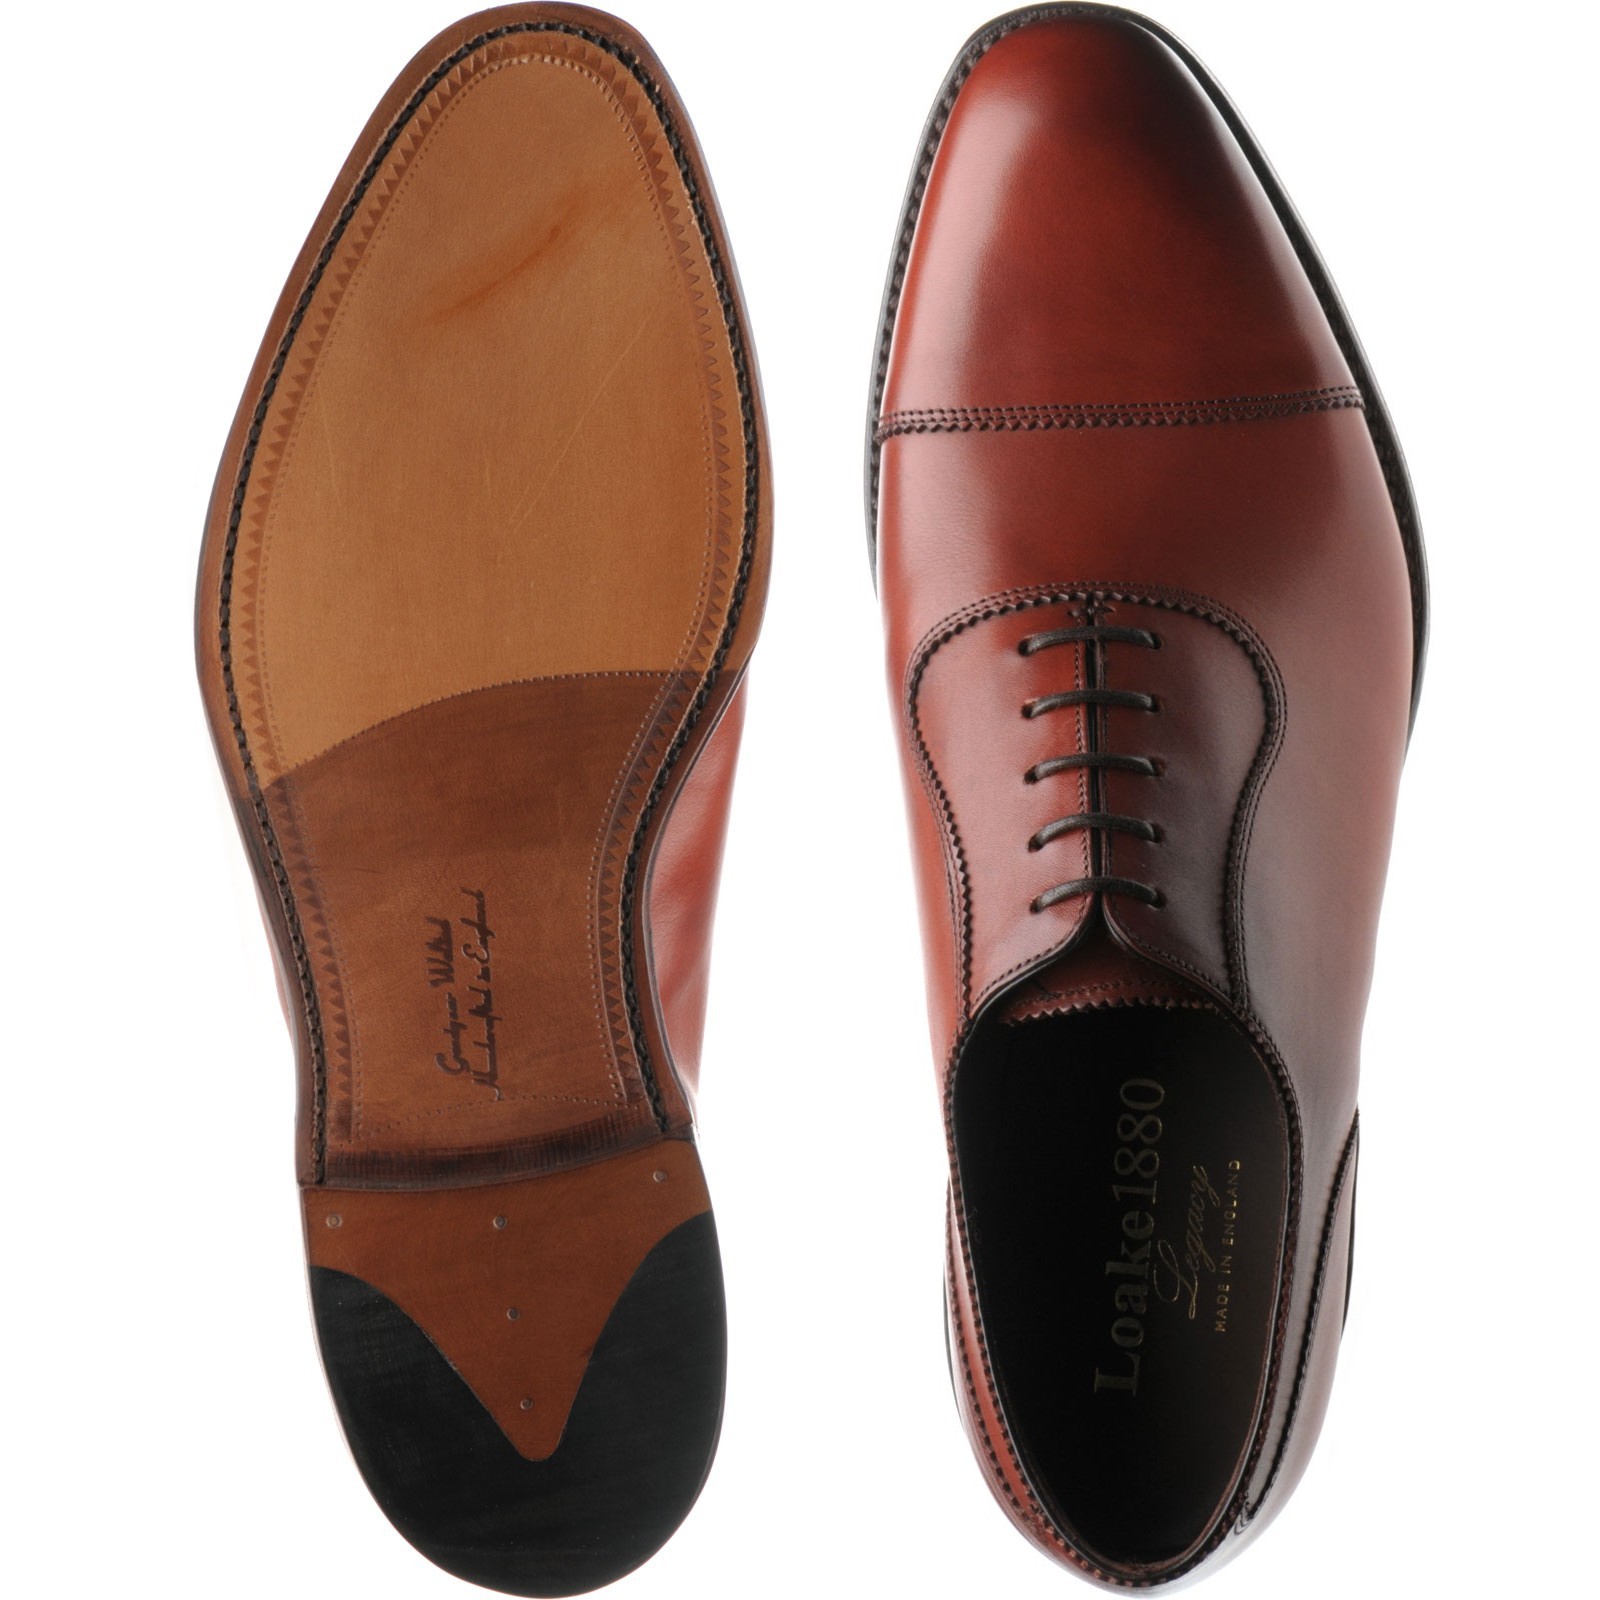 Loake shoes | Loake Factory Seconds | Evans in Conker Calf at Herring Shoes